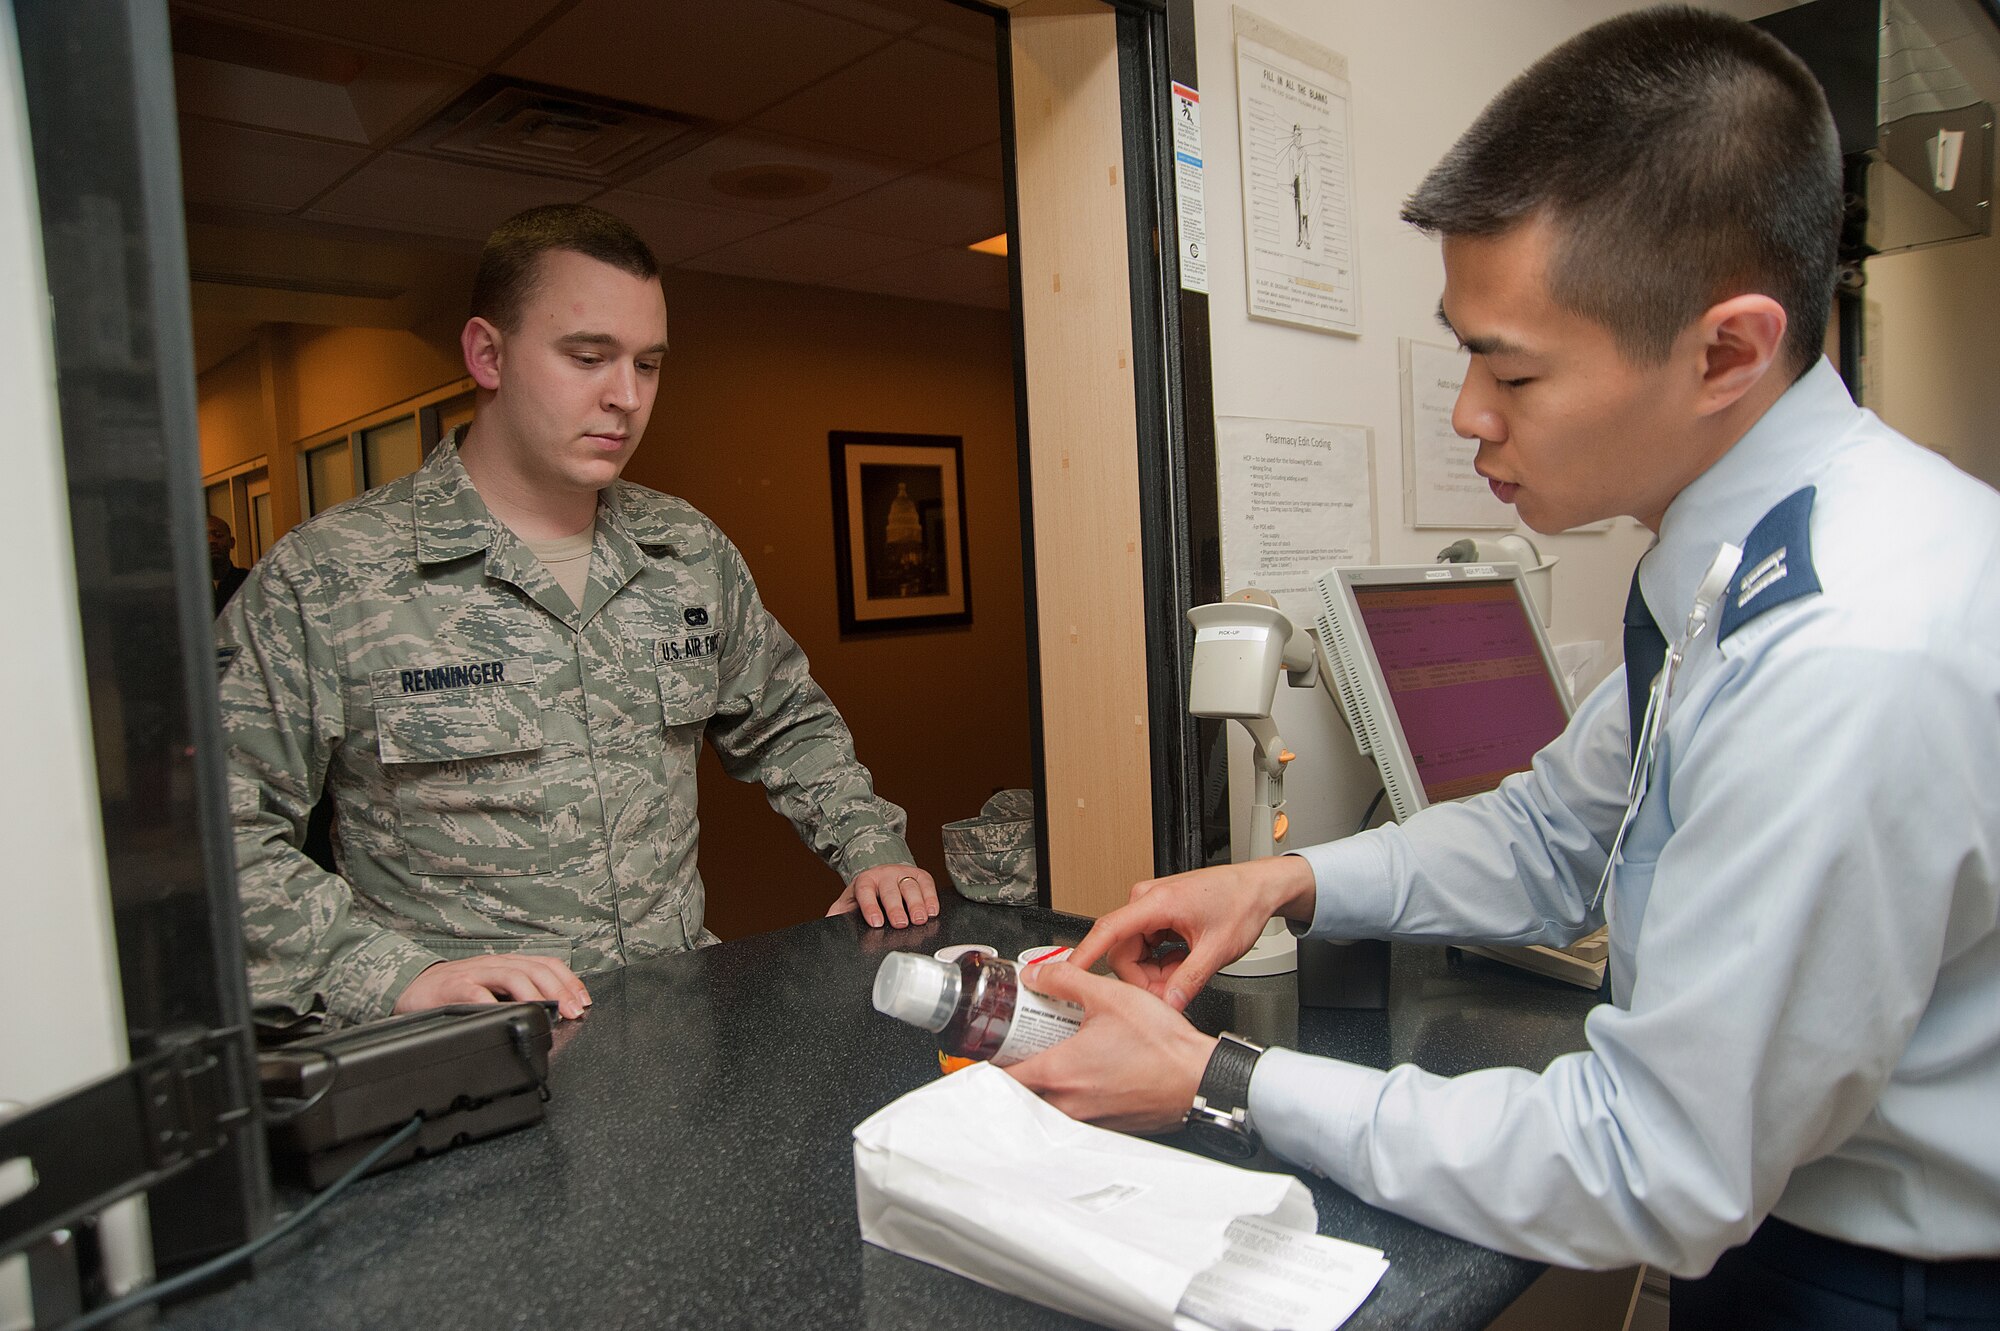 Capt. Truong-Vinh Phung, 779th Medical Support Squadron pharmacist, gives Senior Airman Harry Renninger, 11th Logistics Readiness Squadron vehicle operator, directions on medicine dosage during patient check-in at the Malcolm Grow Medical Center’s Main Pharmacy on March 6. (Photo/Bobby Jones)